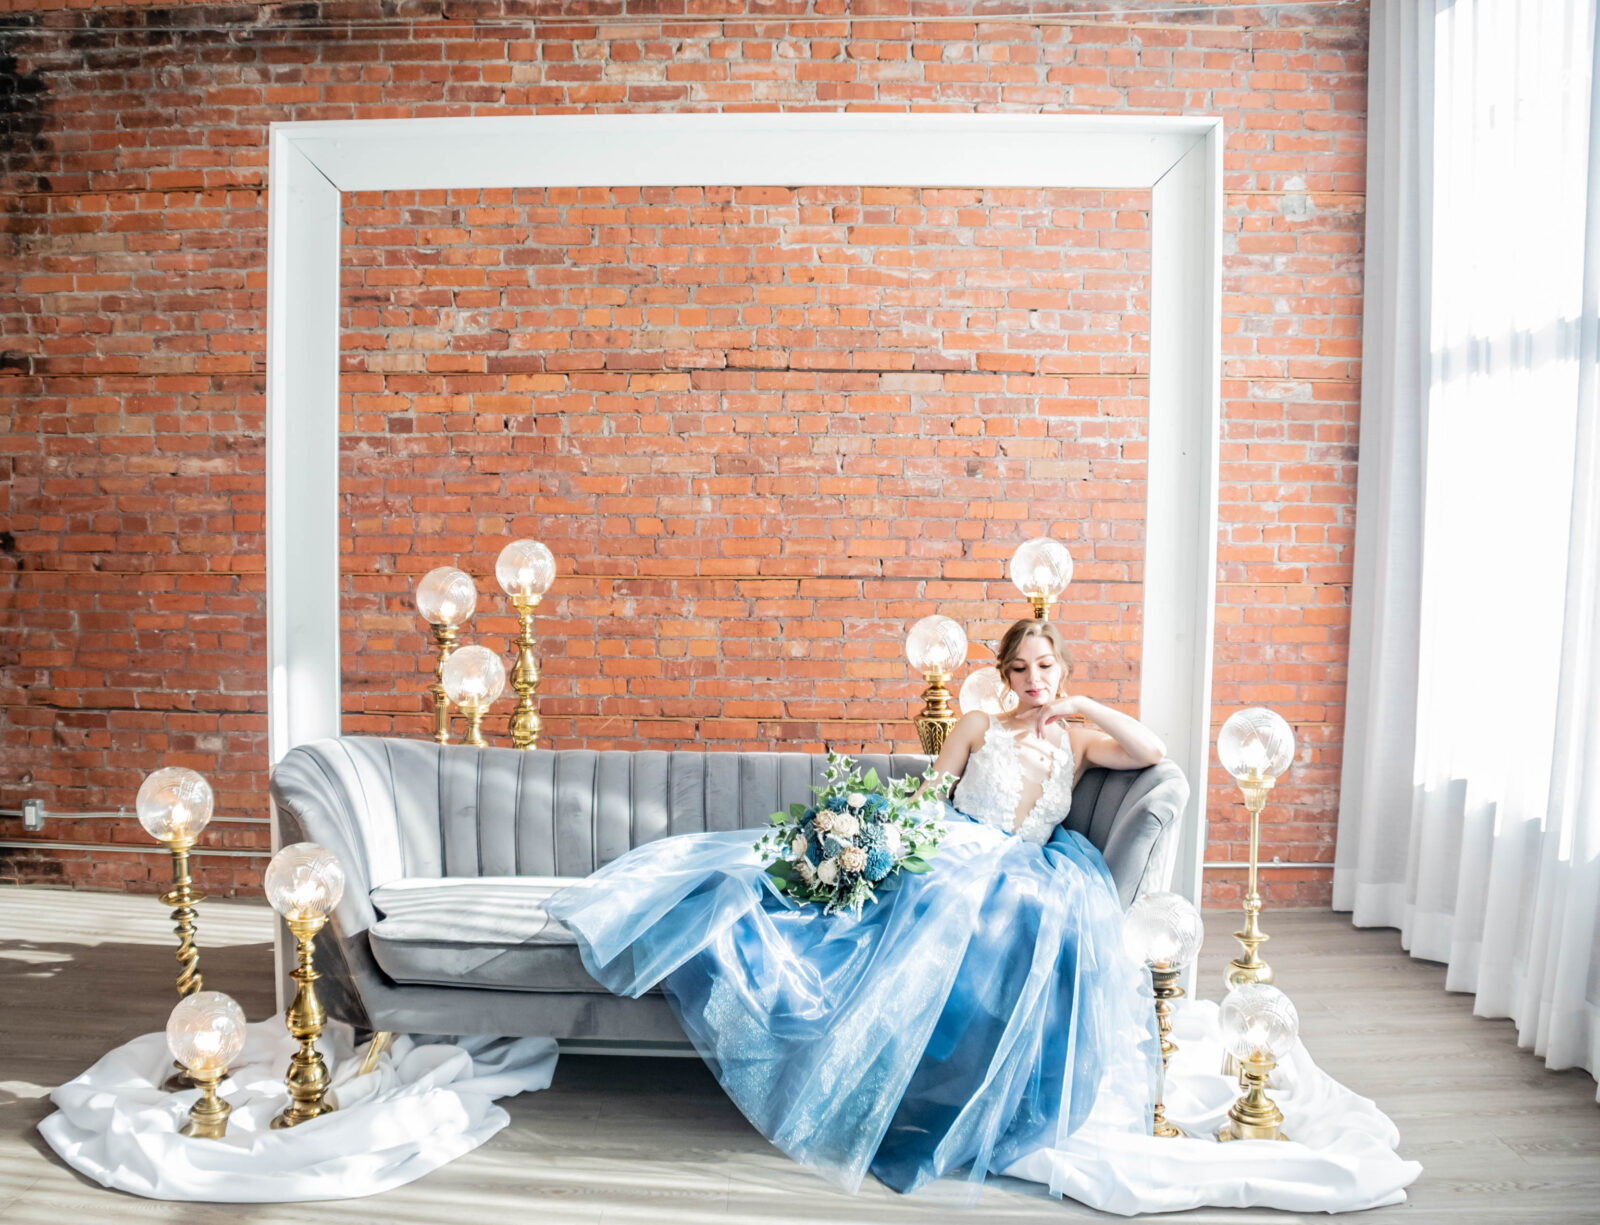 French Macarons & Vintage Lighting in This Classic Baby Blue Wedding Inspiration | Bronte Bride